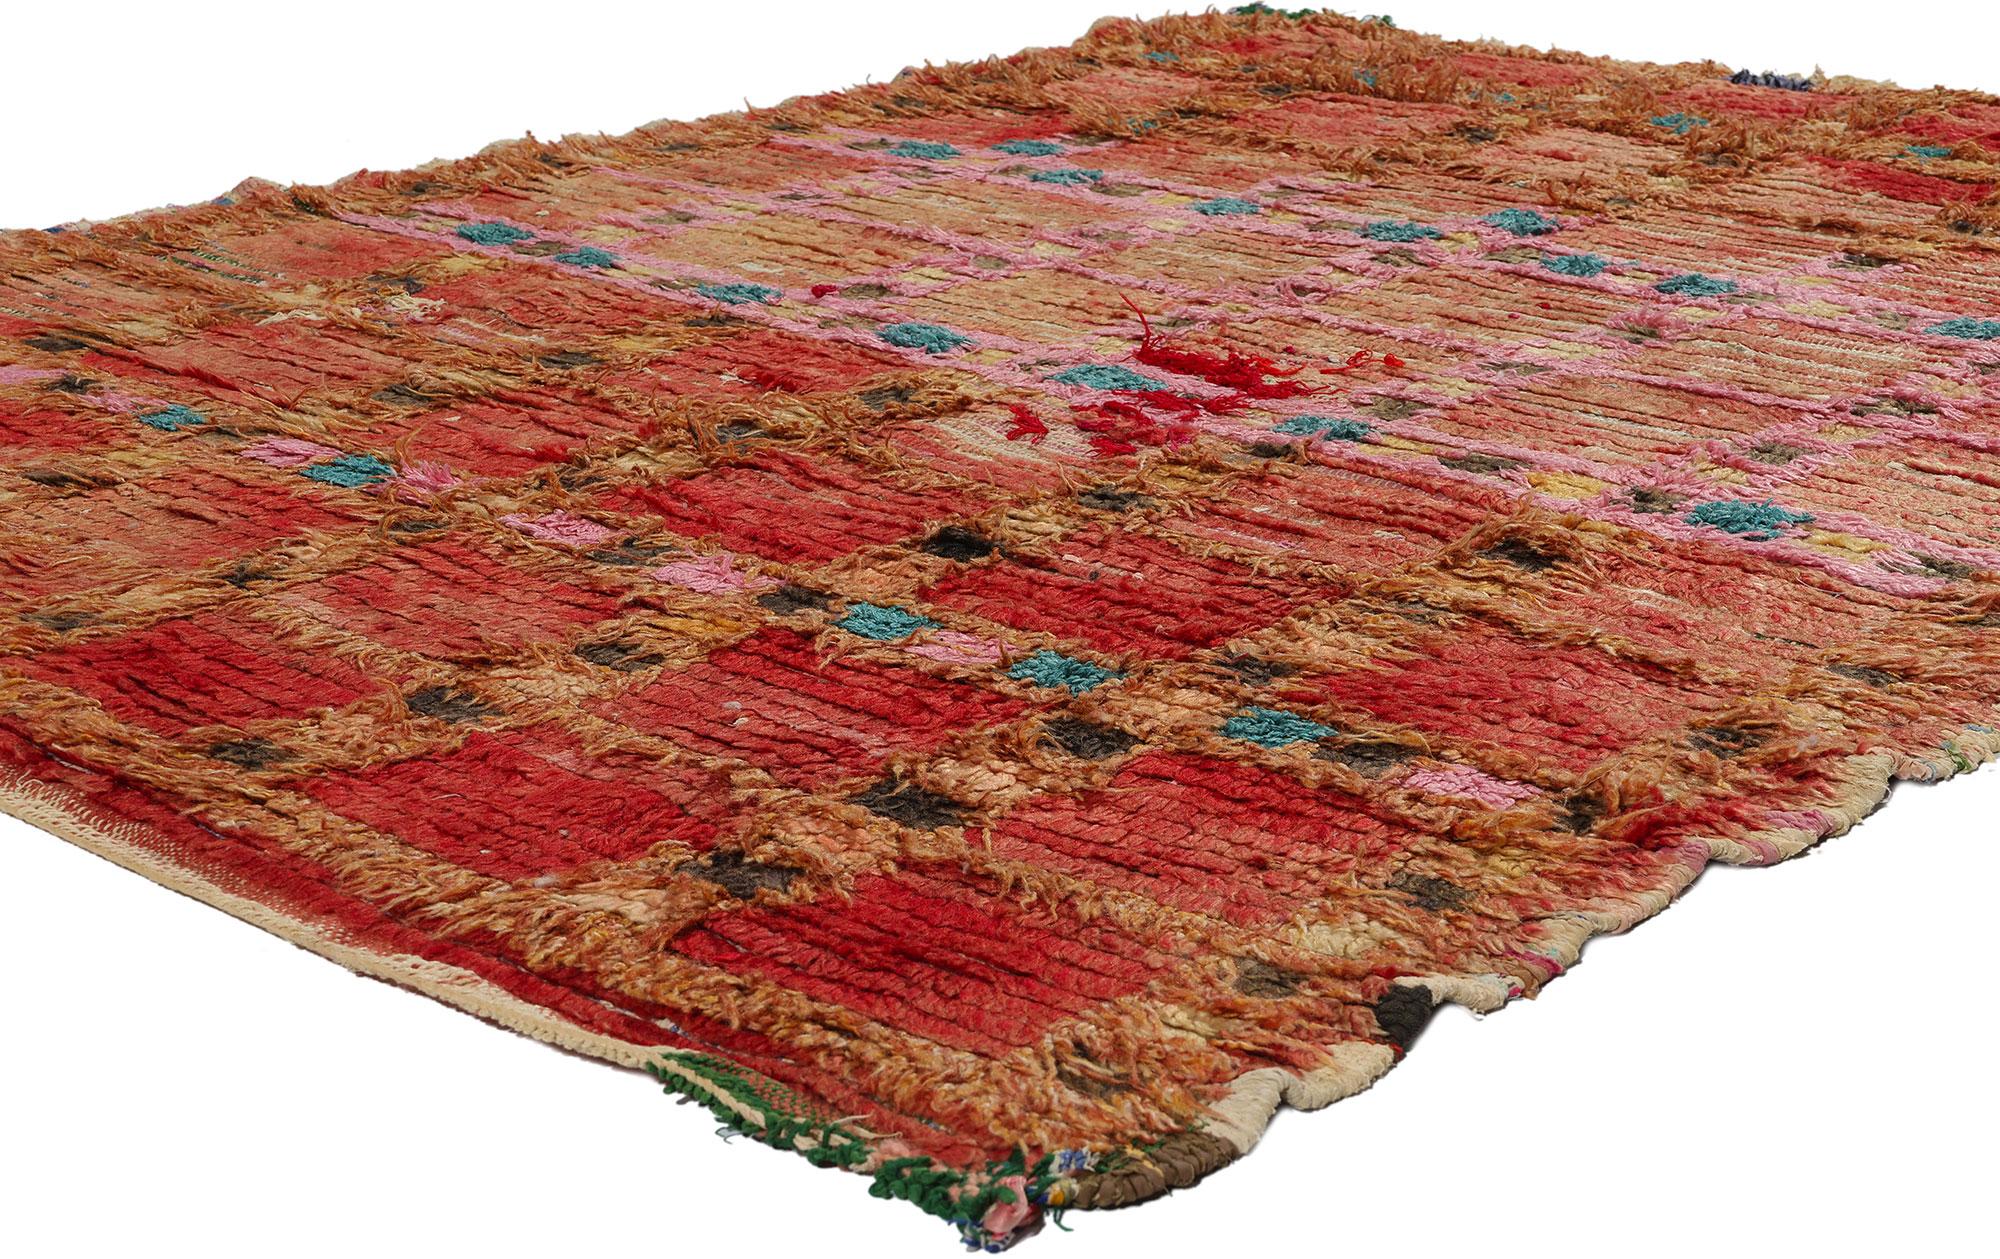 21723 Vintage Red Moroccan Azilal Rug, 05'01 x 06'03. Red Moroccan Azilal rugs are prized exemplars of traditional Moroccan craftsmanship, meticulously handcrafted by skilled Berber artisans from the Azilal region. Their distinguishing feature is